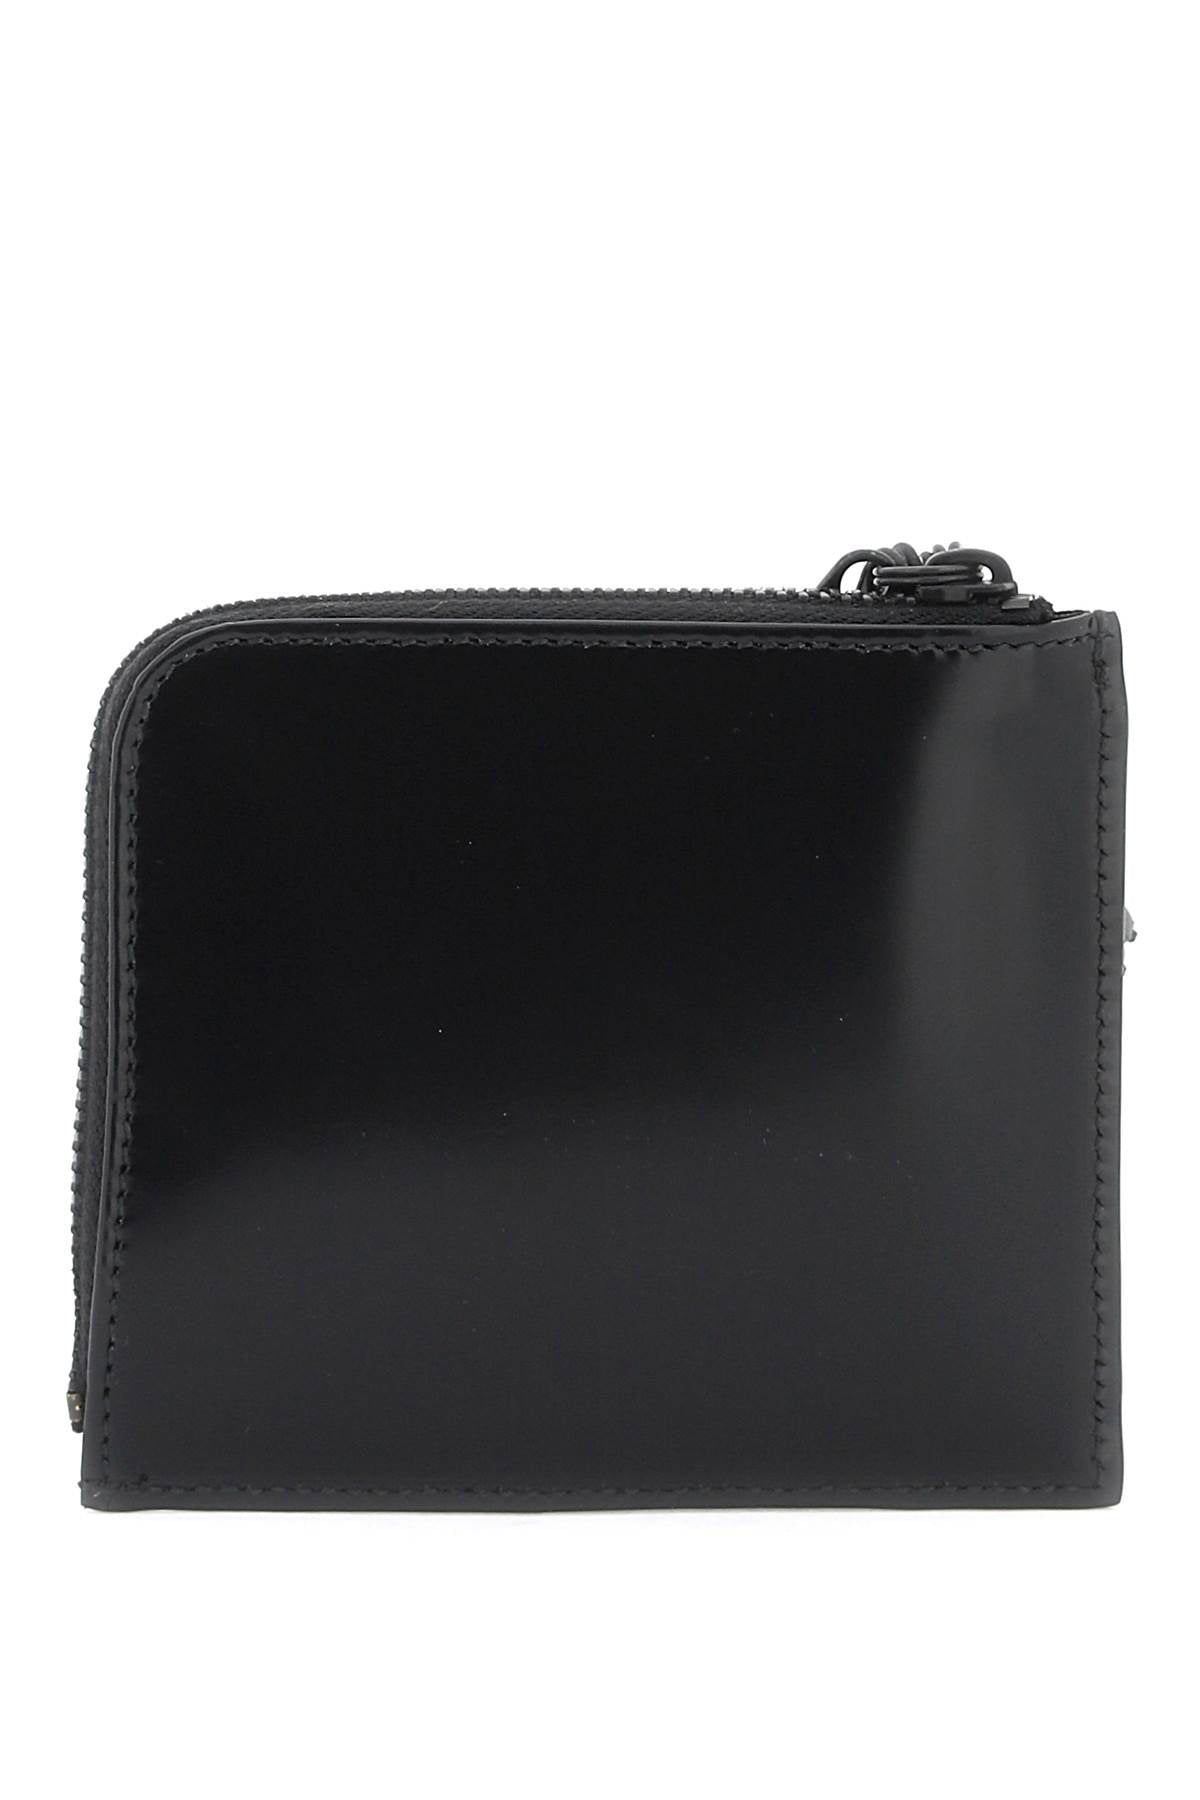 Comme des garcons wallet leather multi-zip wallet with-2